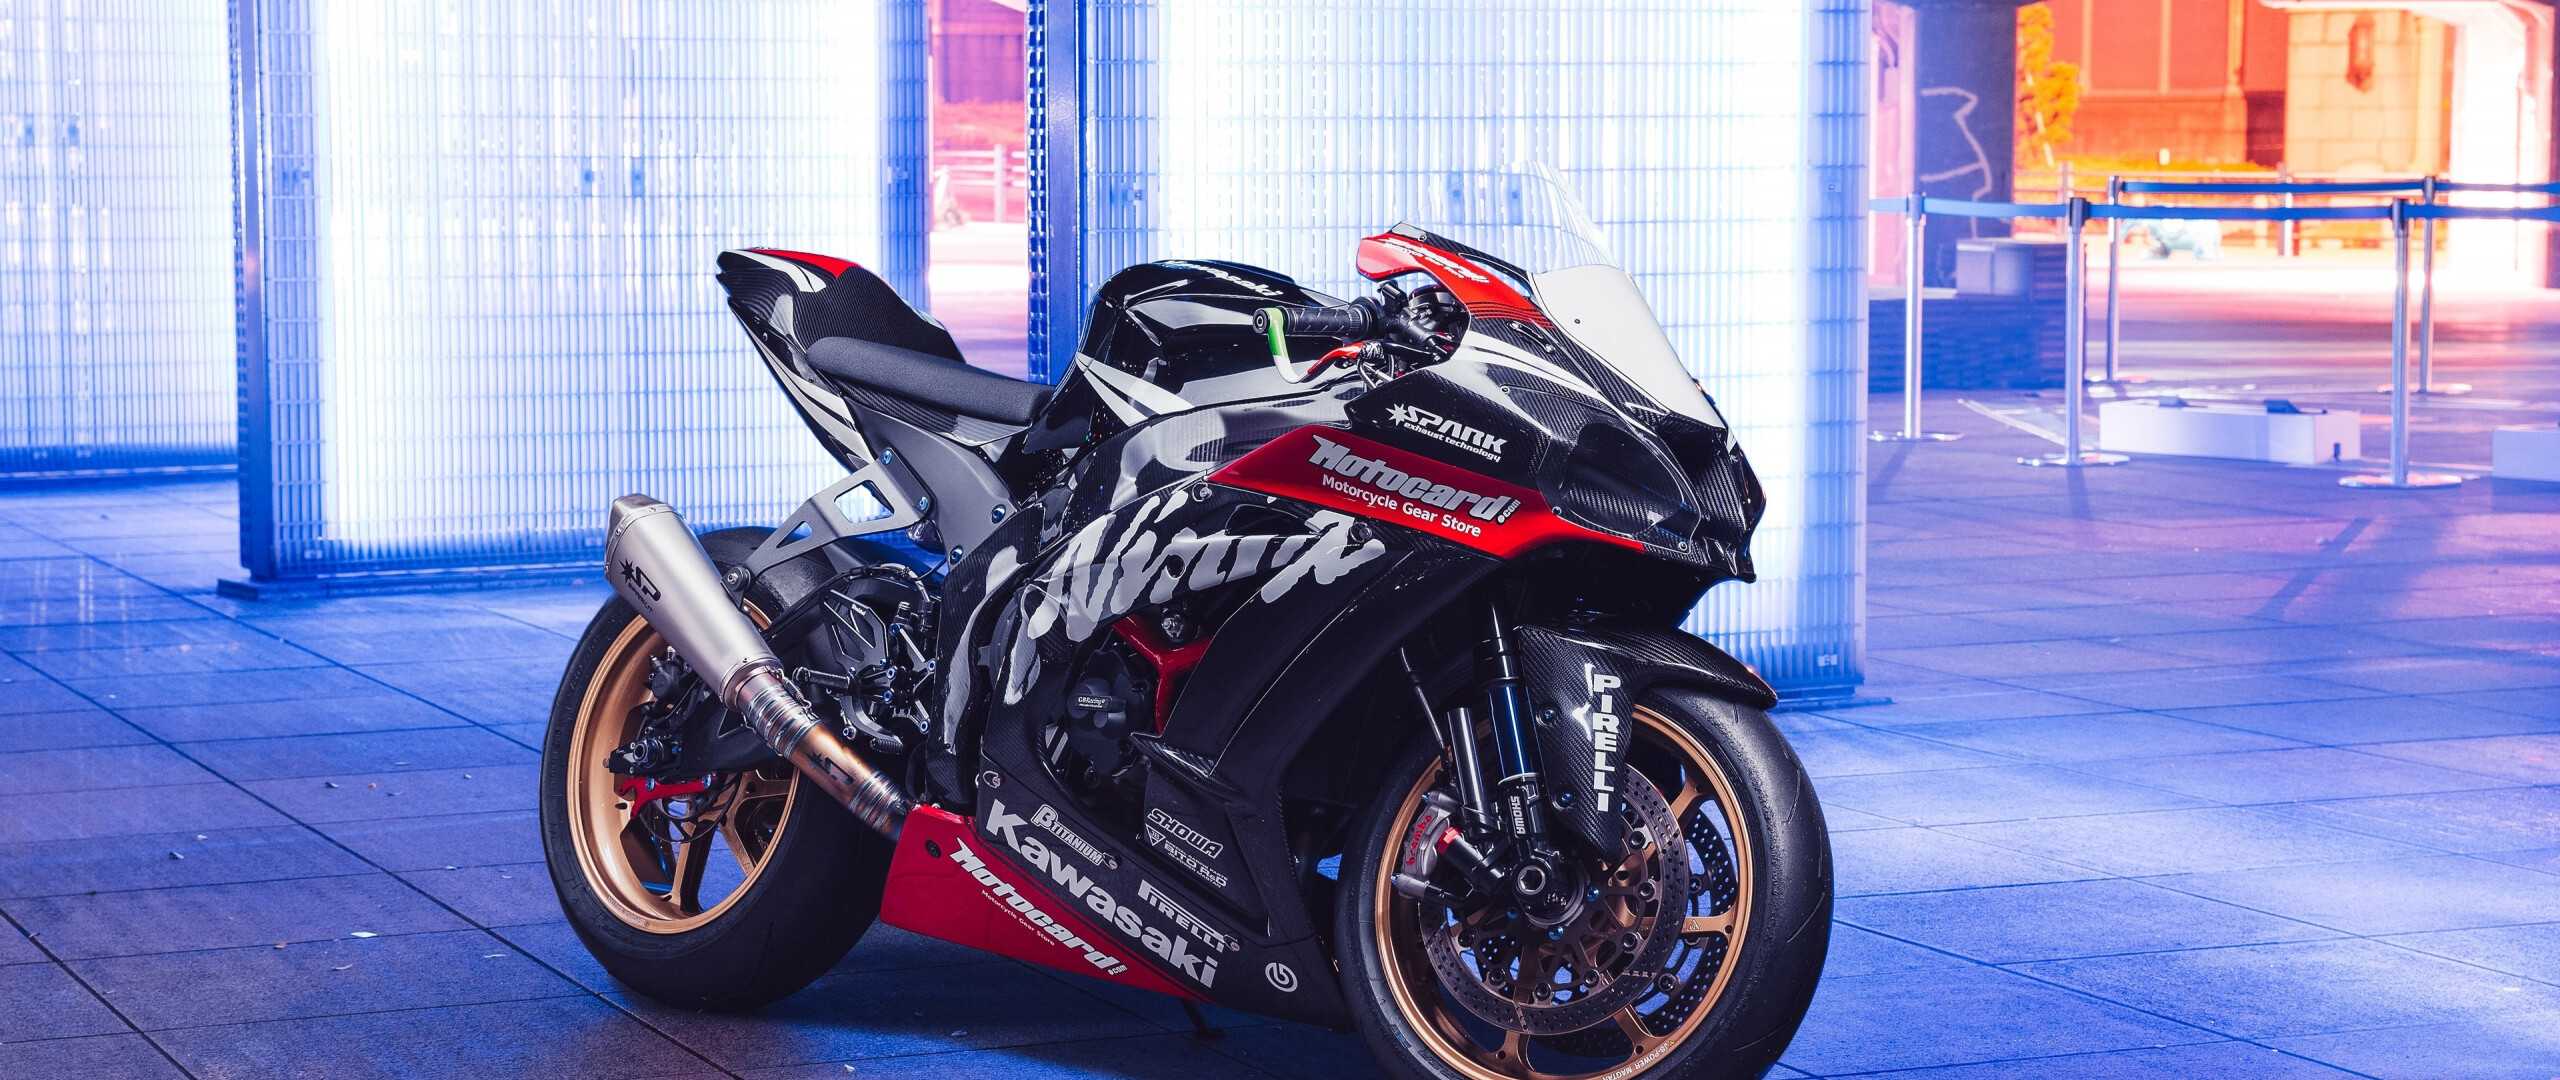 Kawasaki Ninja ZX: ZX-10R, A track-focused bike, First launched in 2004. 2560x1080 Dual Screen Background.